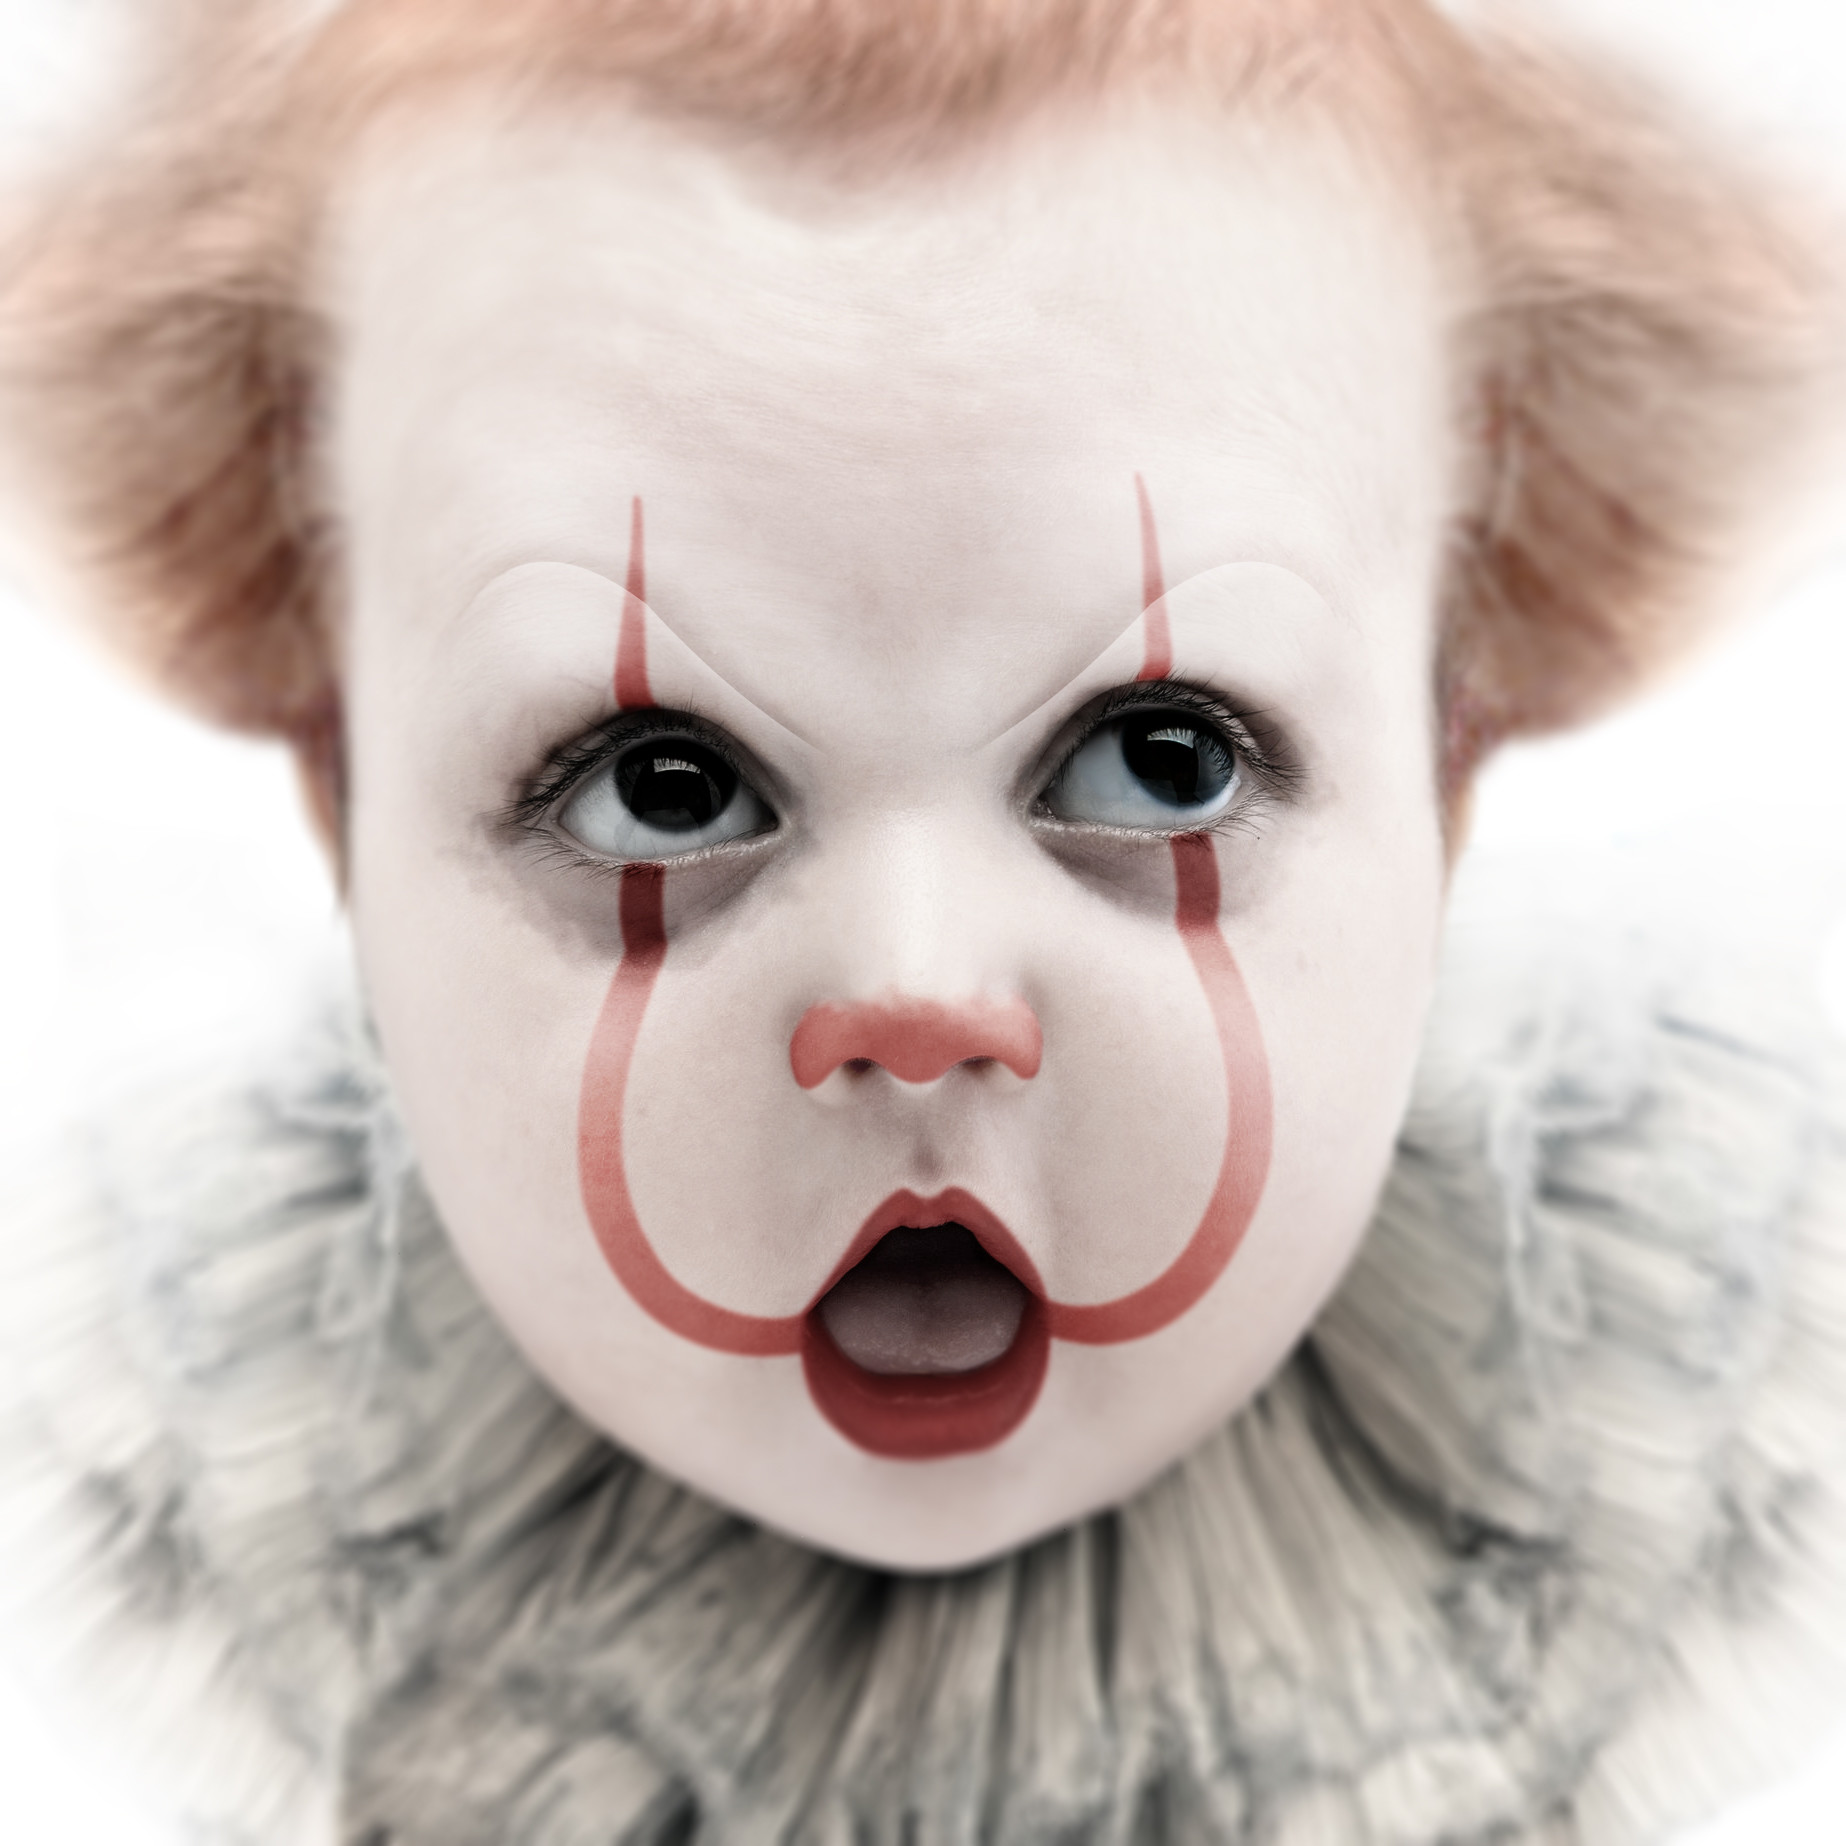 pennywise baby doll